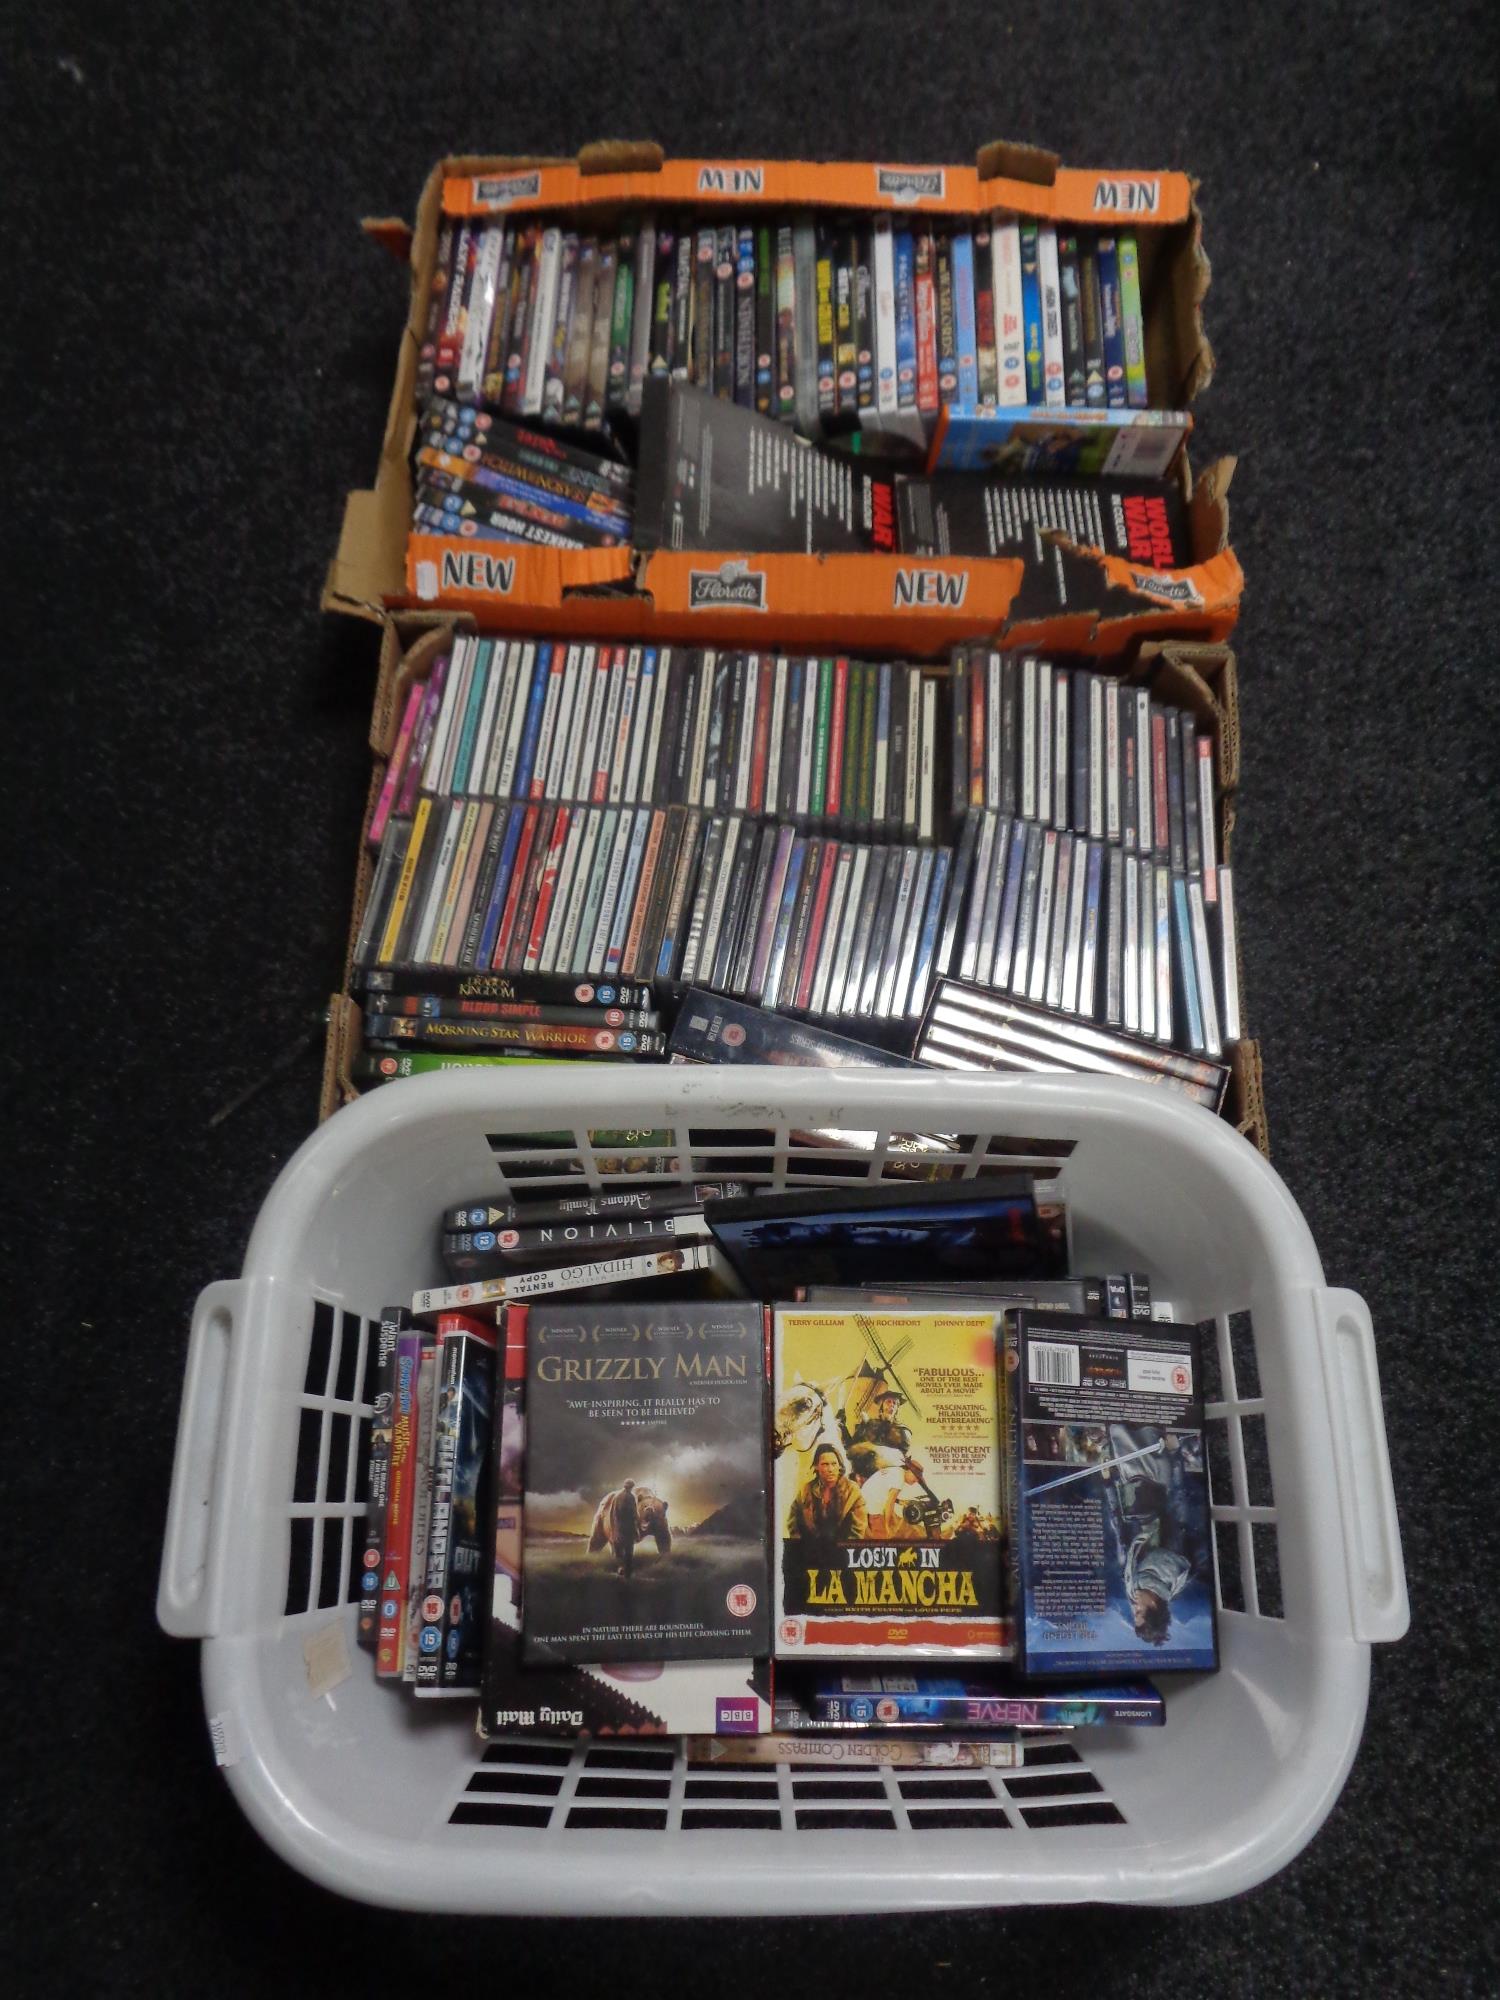 Six boxes of CDs and DVDs.